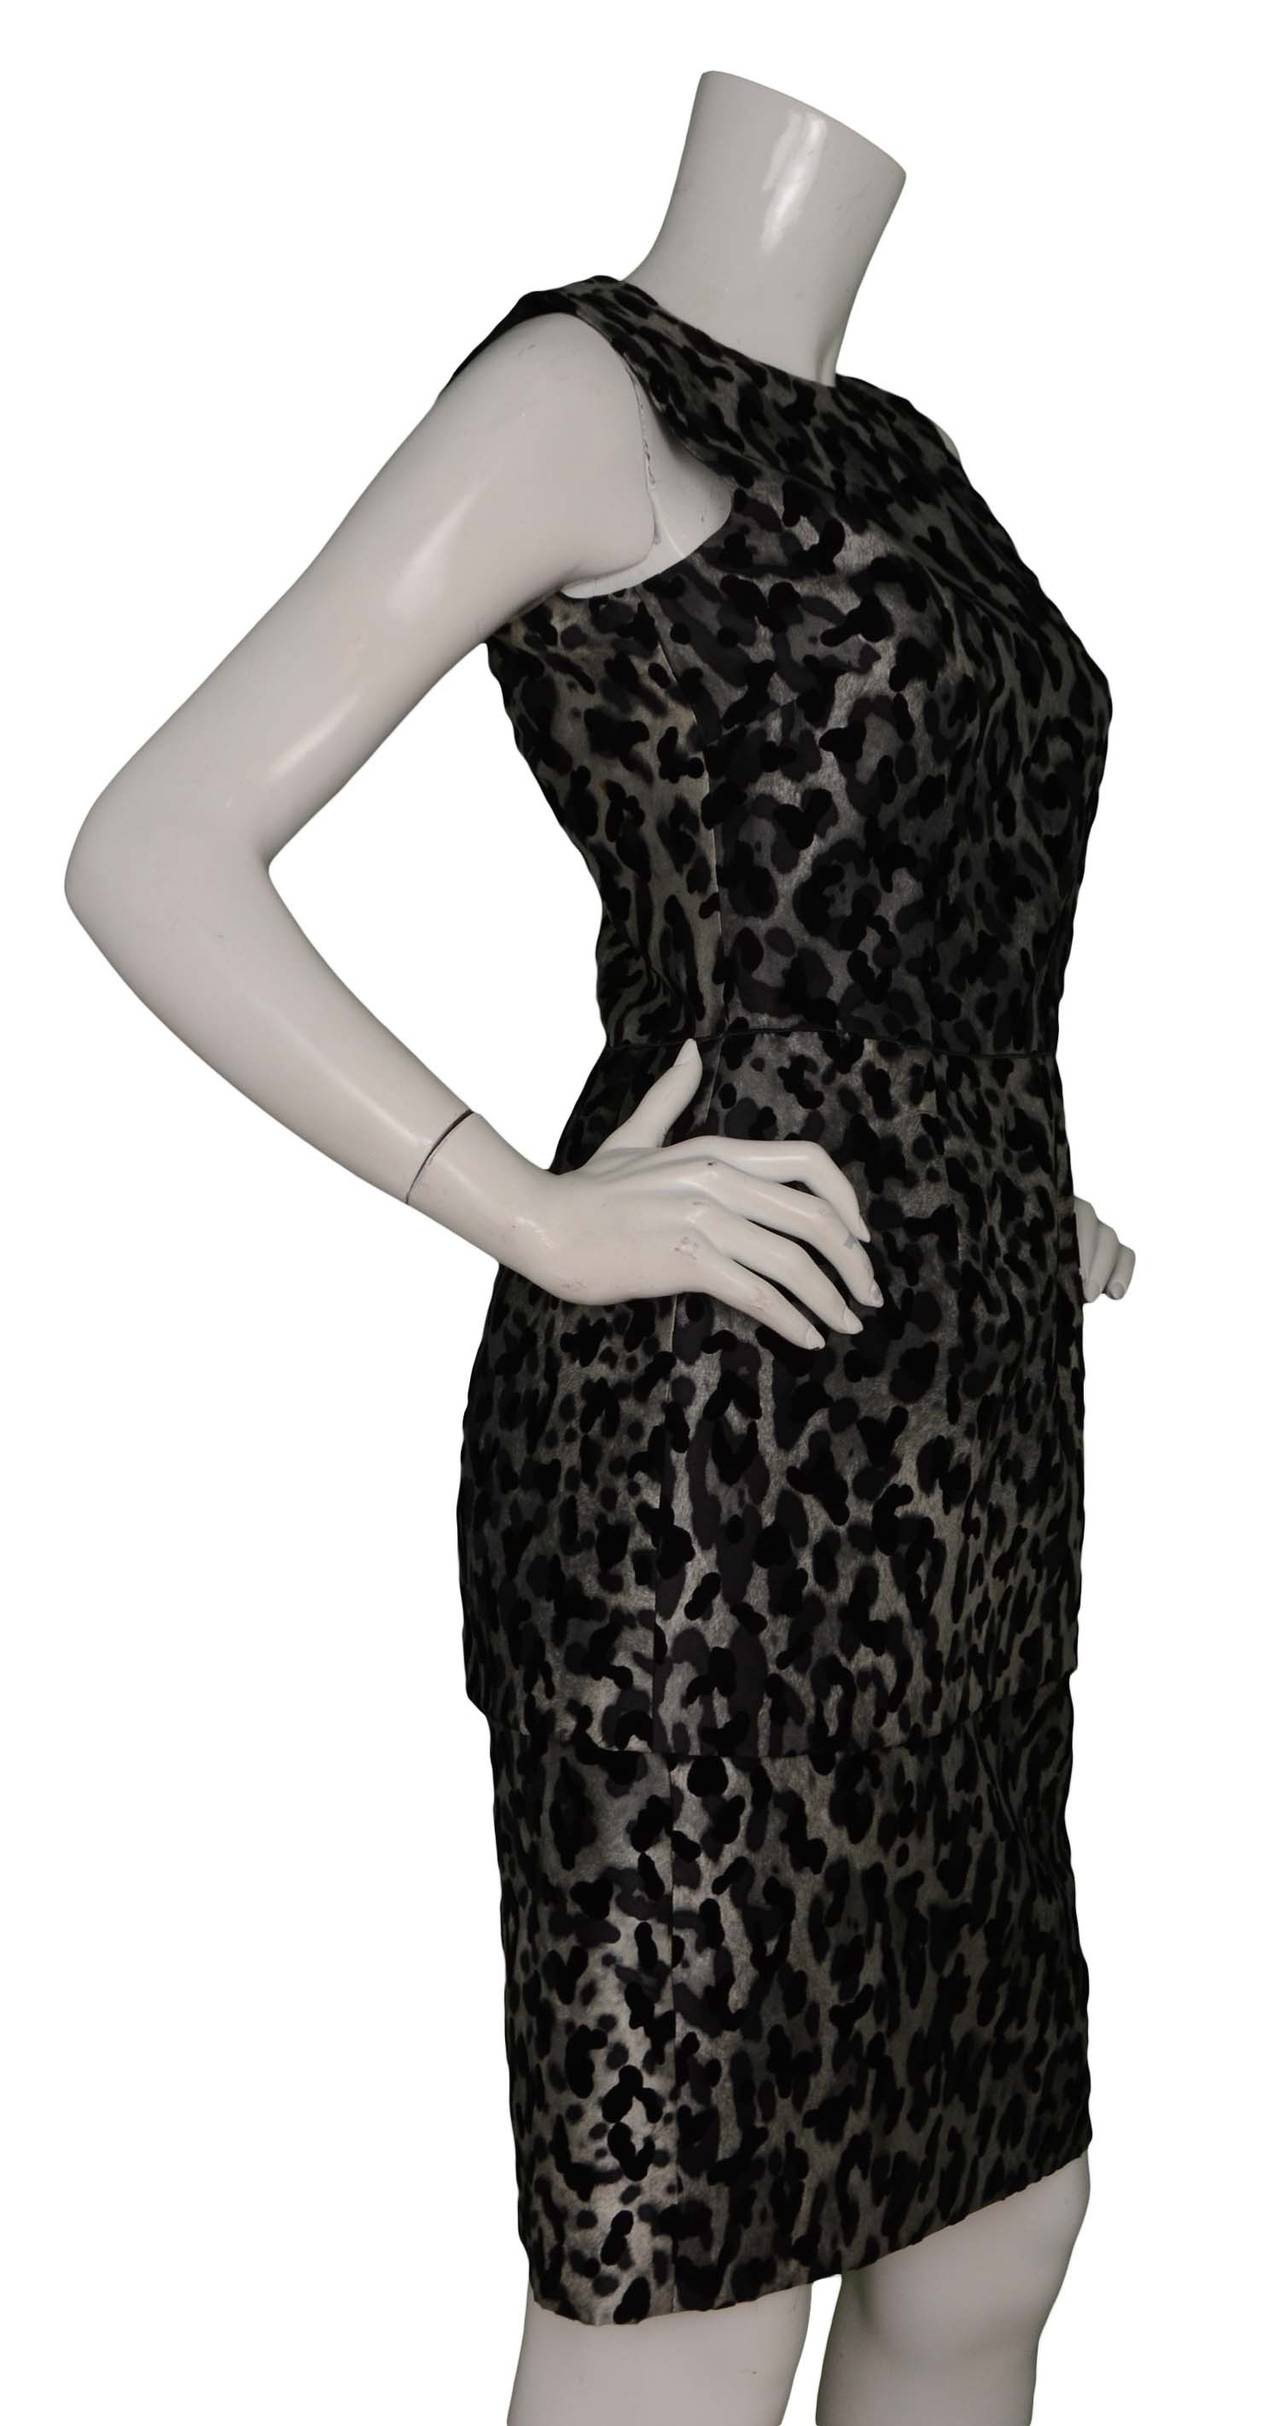 Features black velvet leopard spots and peplum skirt

-Made in: Italy
-Color: Grey and black
-Composition: 50% rayon, 50% silk
-Lining: 100% black silk
-Closure/opening: Silvertone back zipper
-Overall Condition: Excellent, with no visible